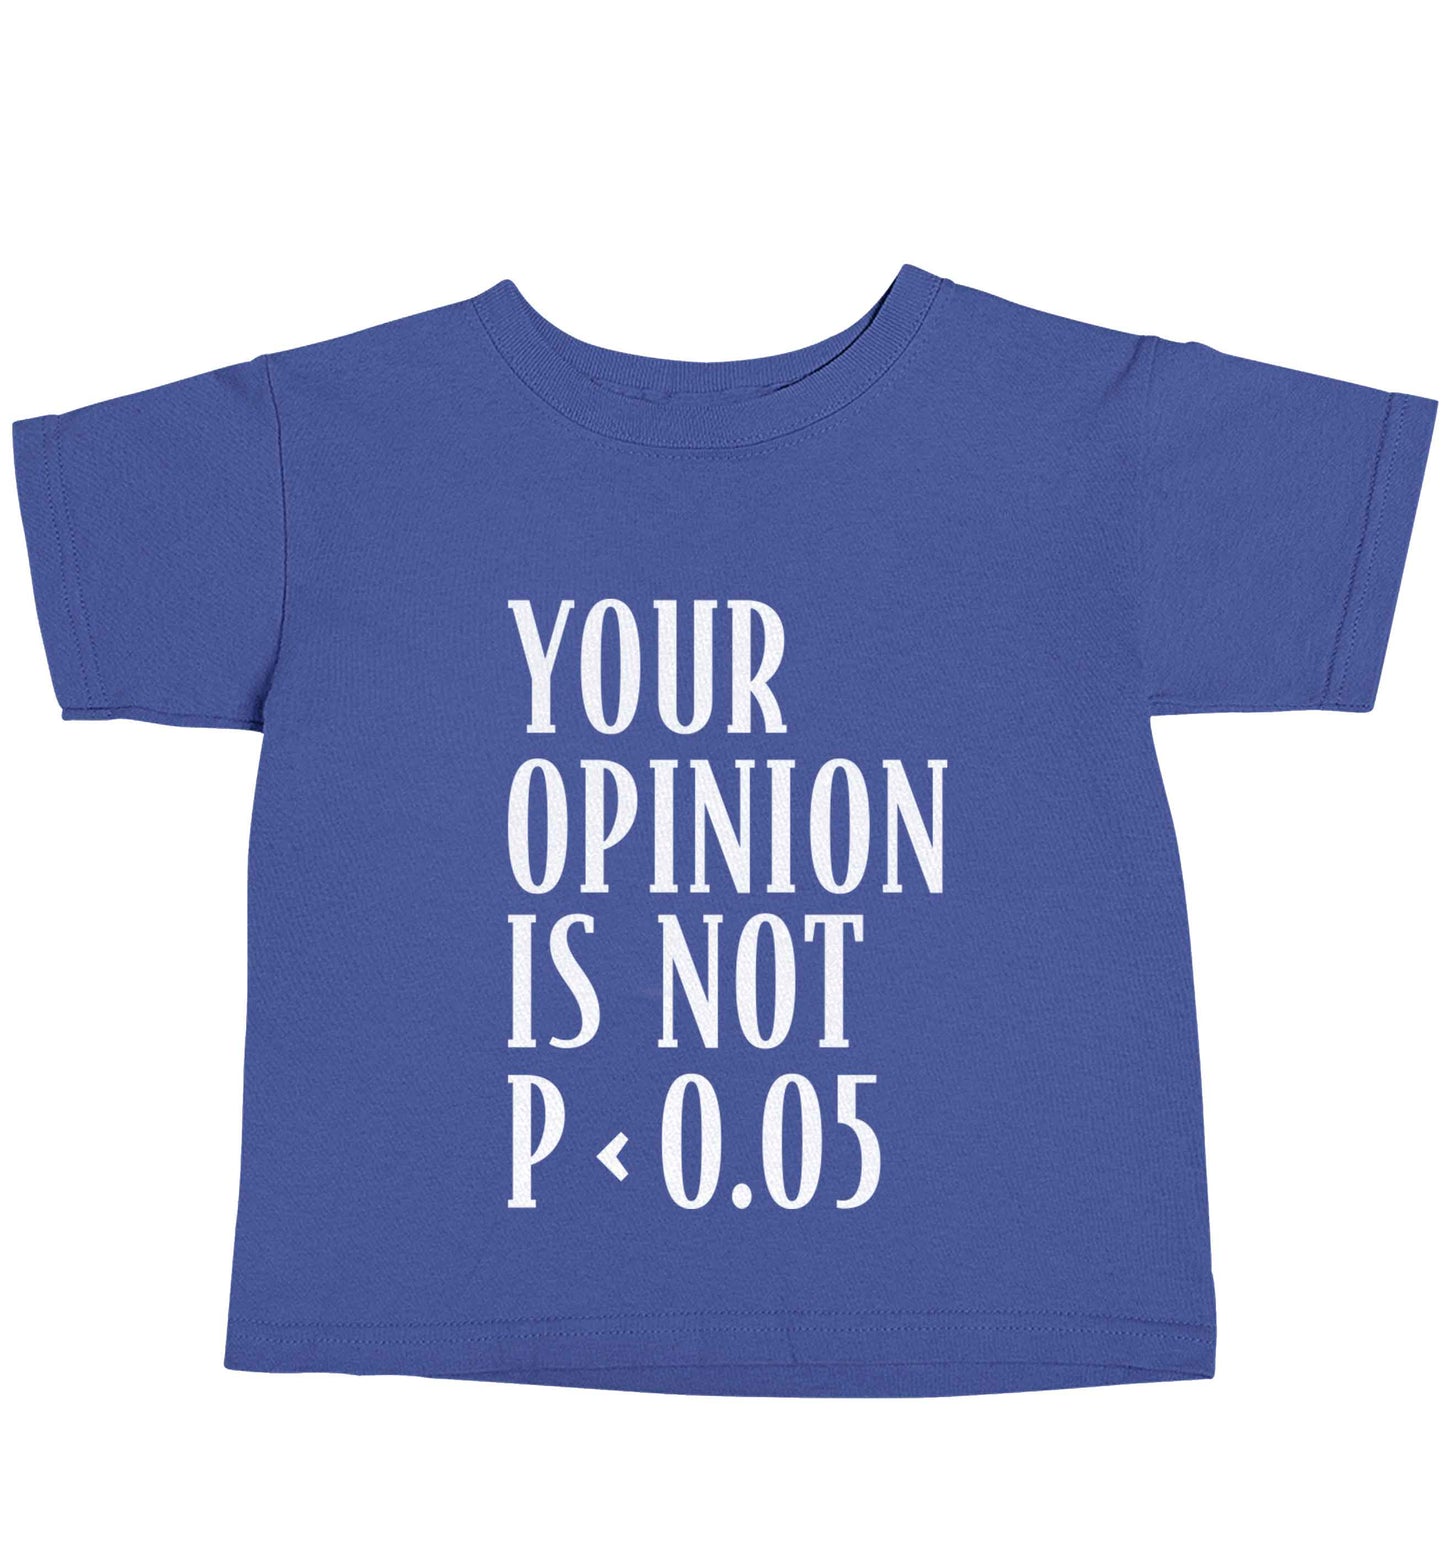 Your opinion is not P < 0.05blue baby toddler Tshirt 2 Years